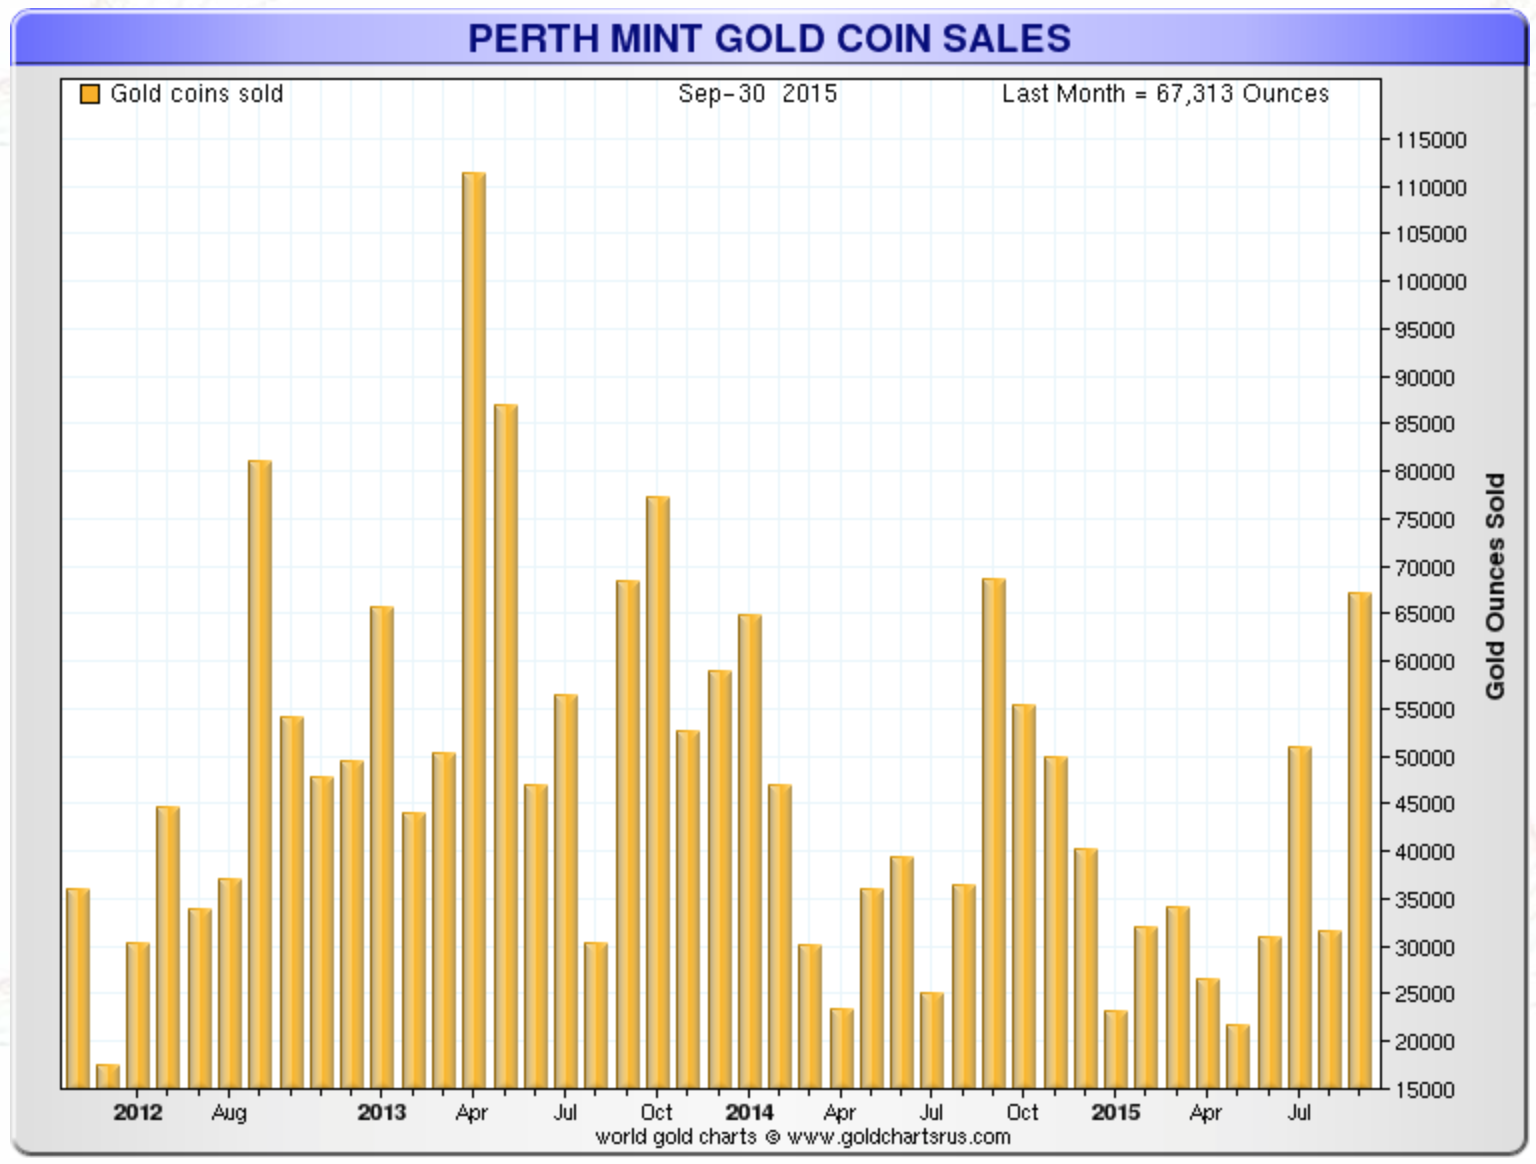 Perth Mint gold coin sales